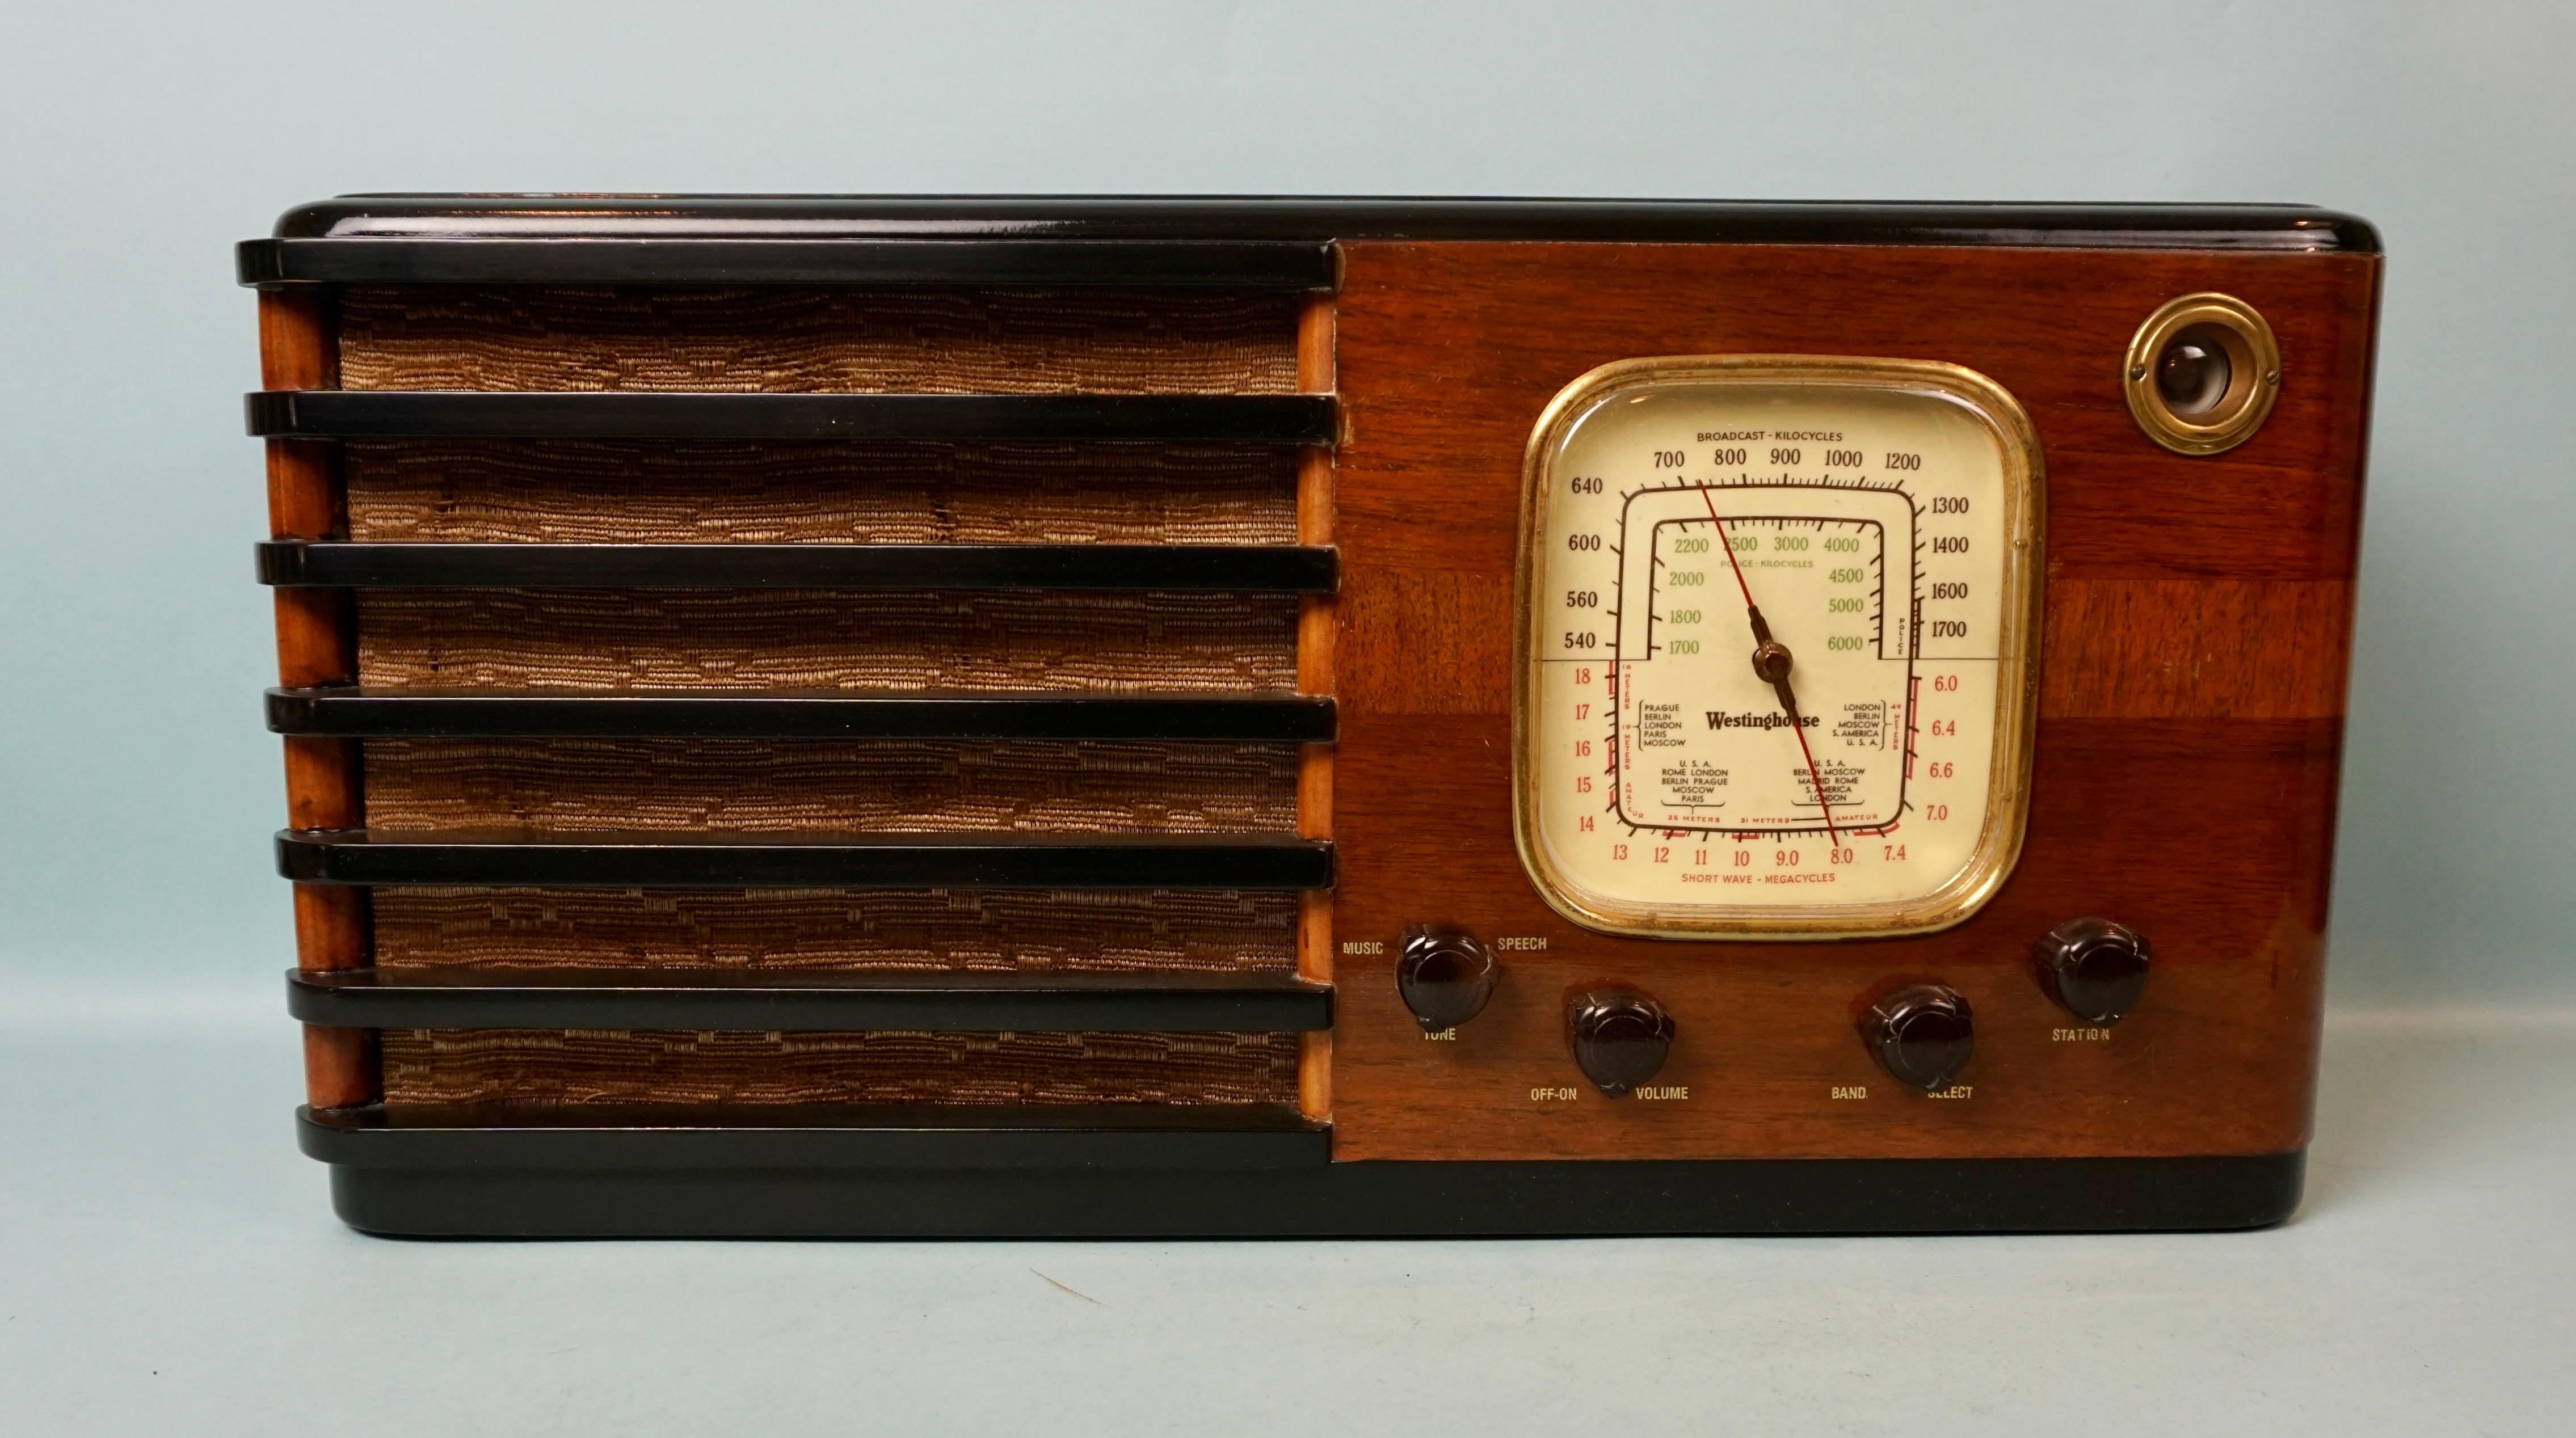 A handsome Westinghouse combination shortwave radio, the French polished mahogany case housing a tube movement with multiple radio settings, made and signed by Westinghouse. This radio has a shortwave function broadcasting in megacycles, as well as